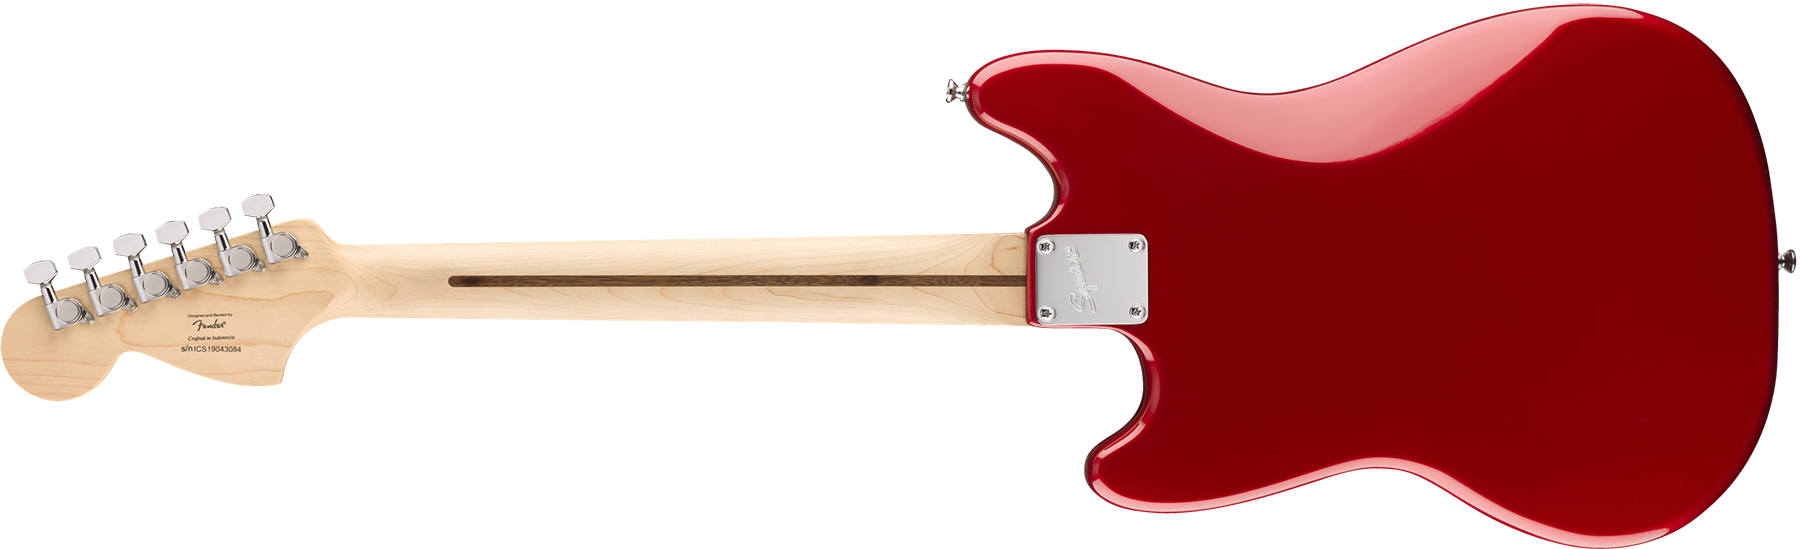 Squier Mustang Bullet Competition Hh Fsr Ht Lau - Candy Apple Red - Guitarra electrica retro rock - Variation 1